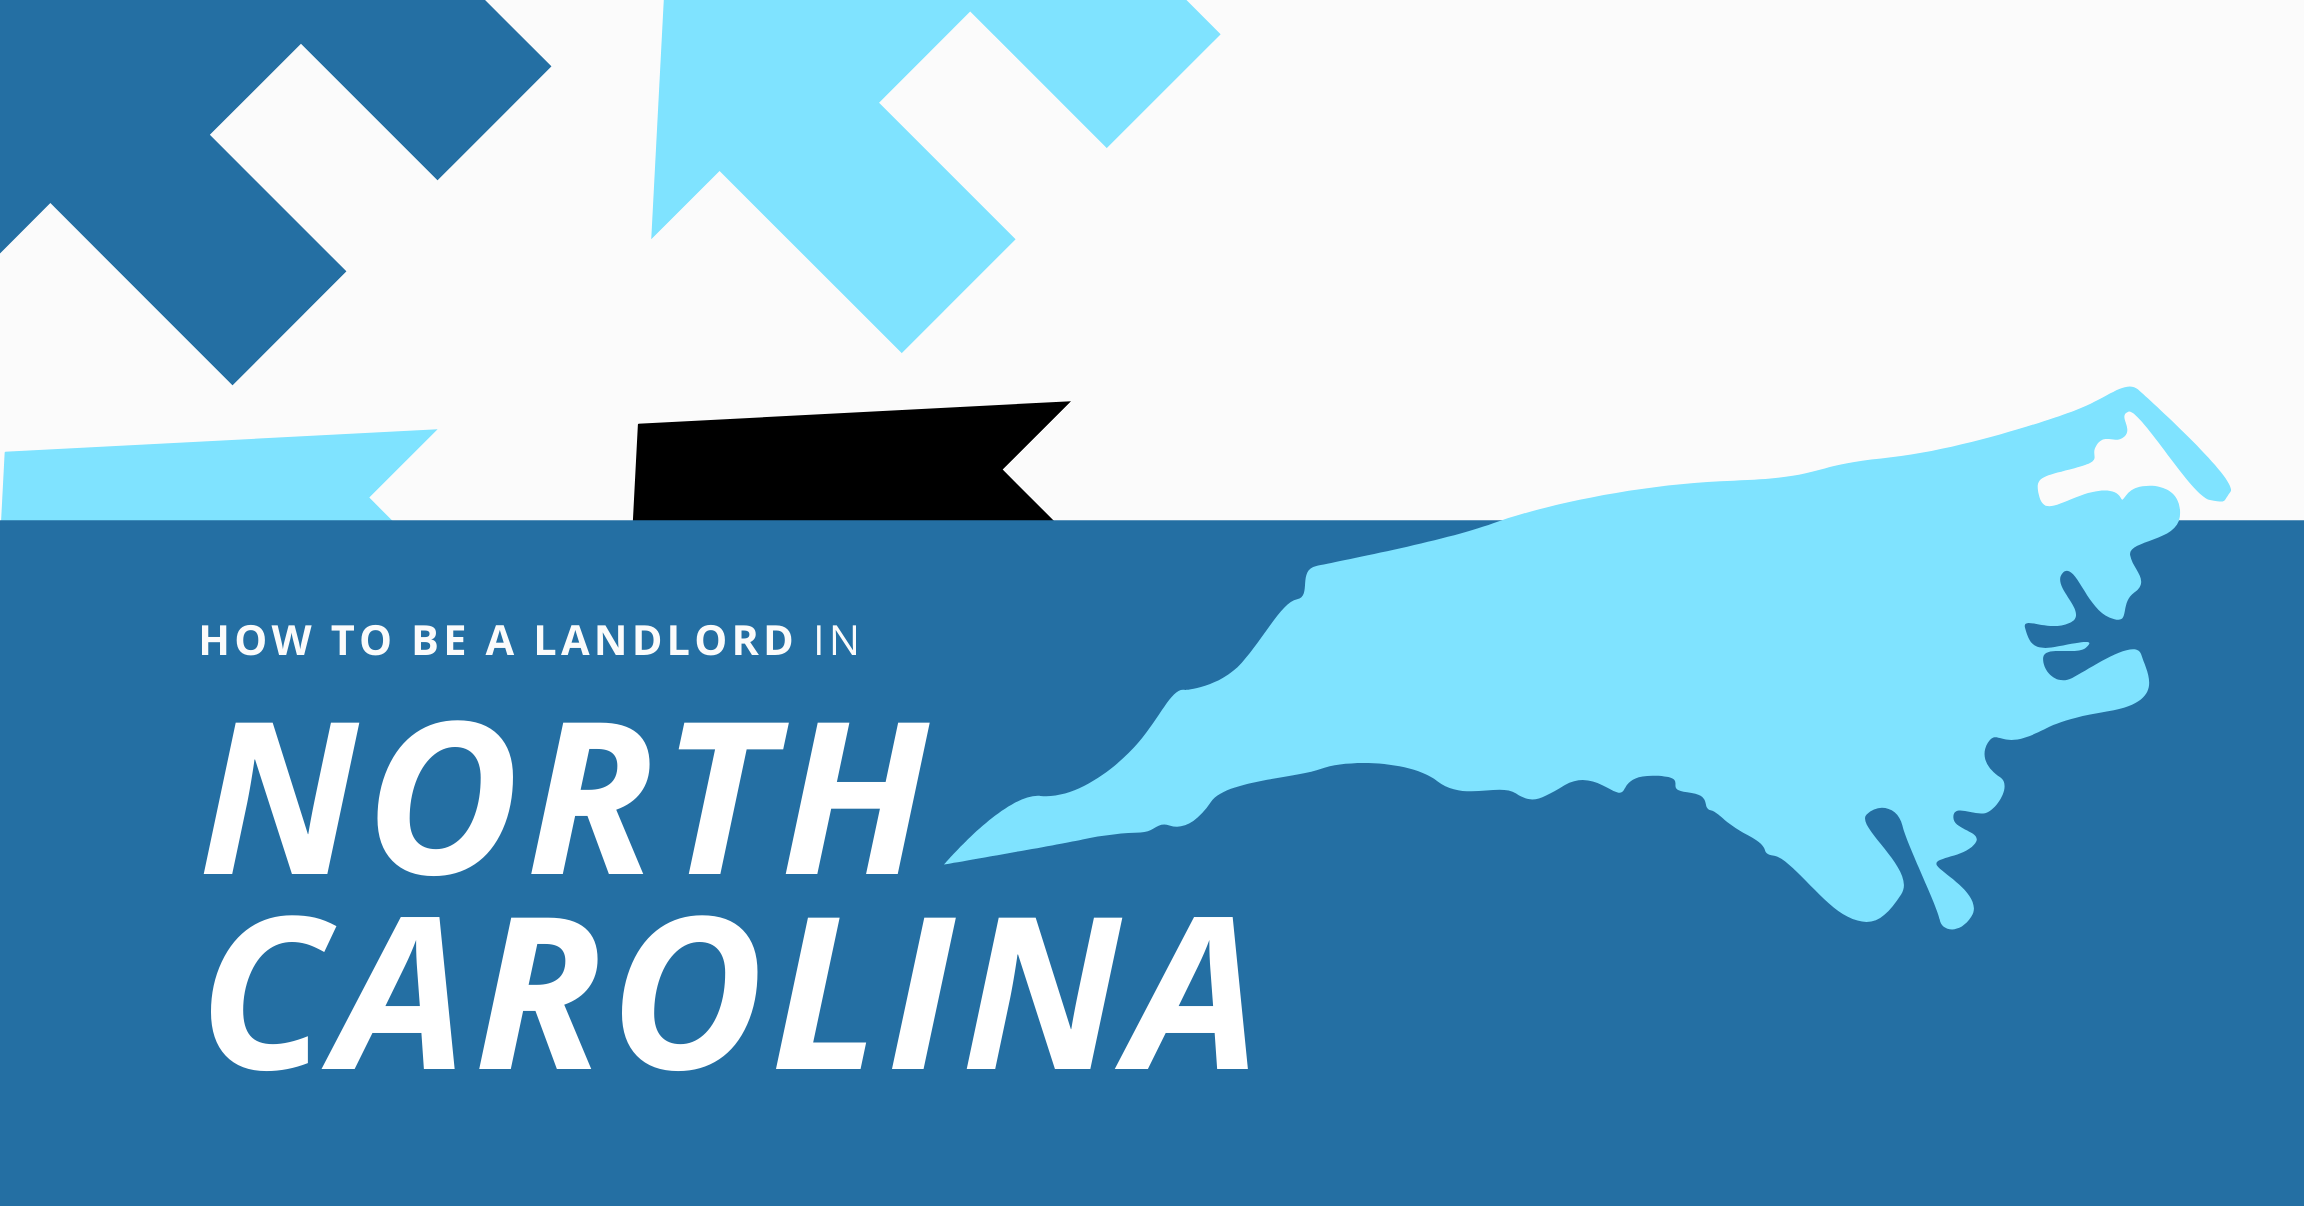 How to be a landlord in North Carolina